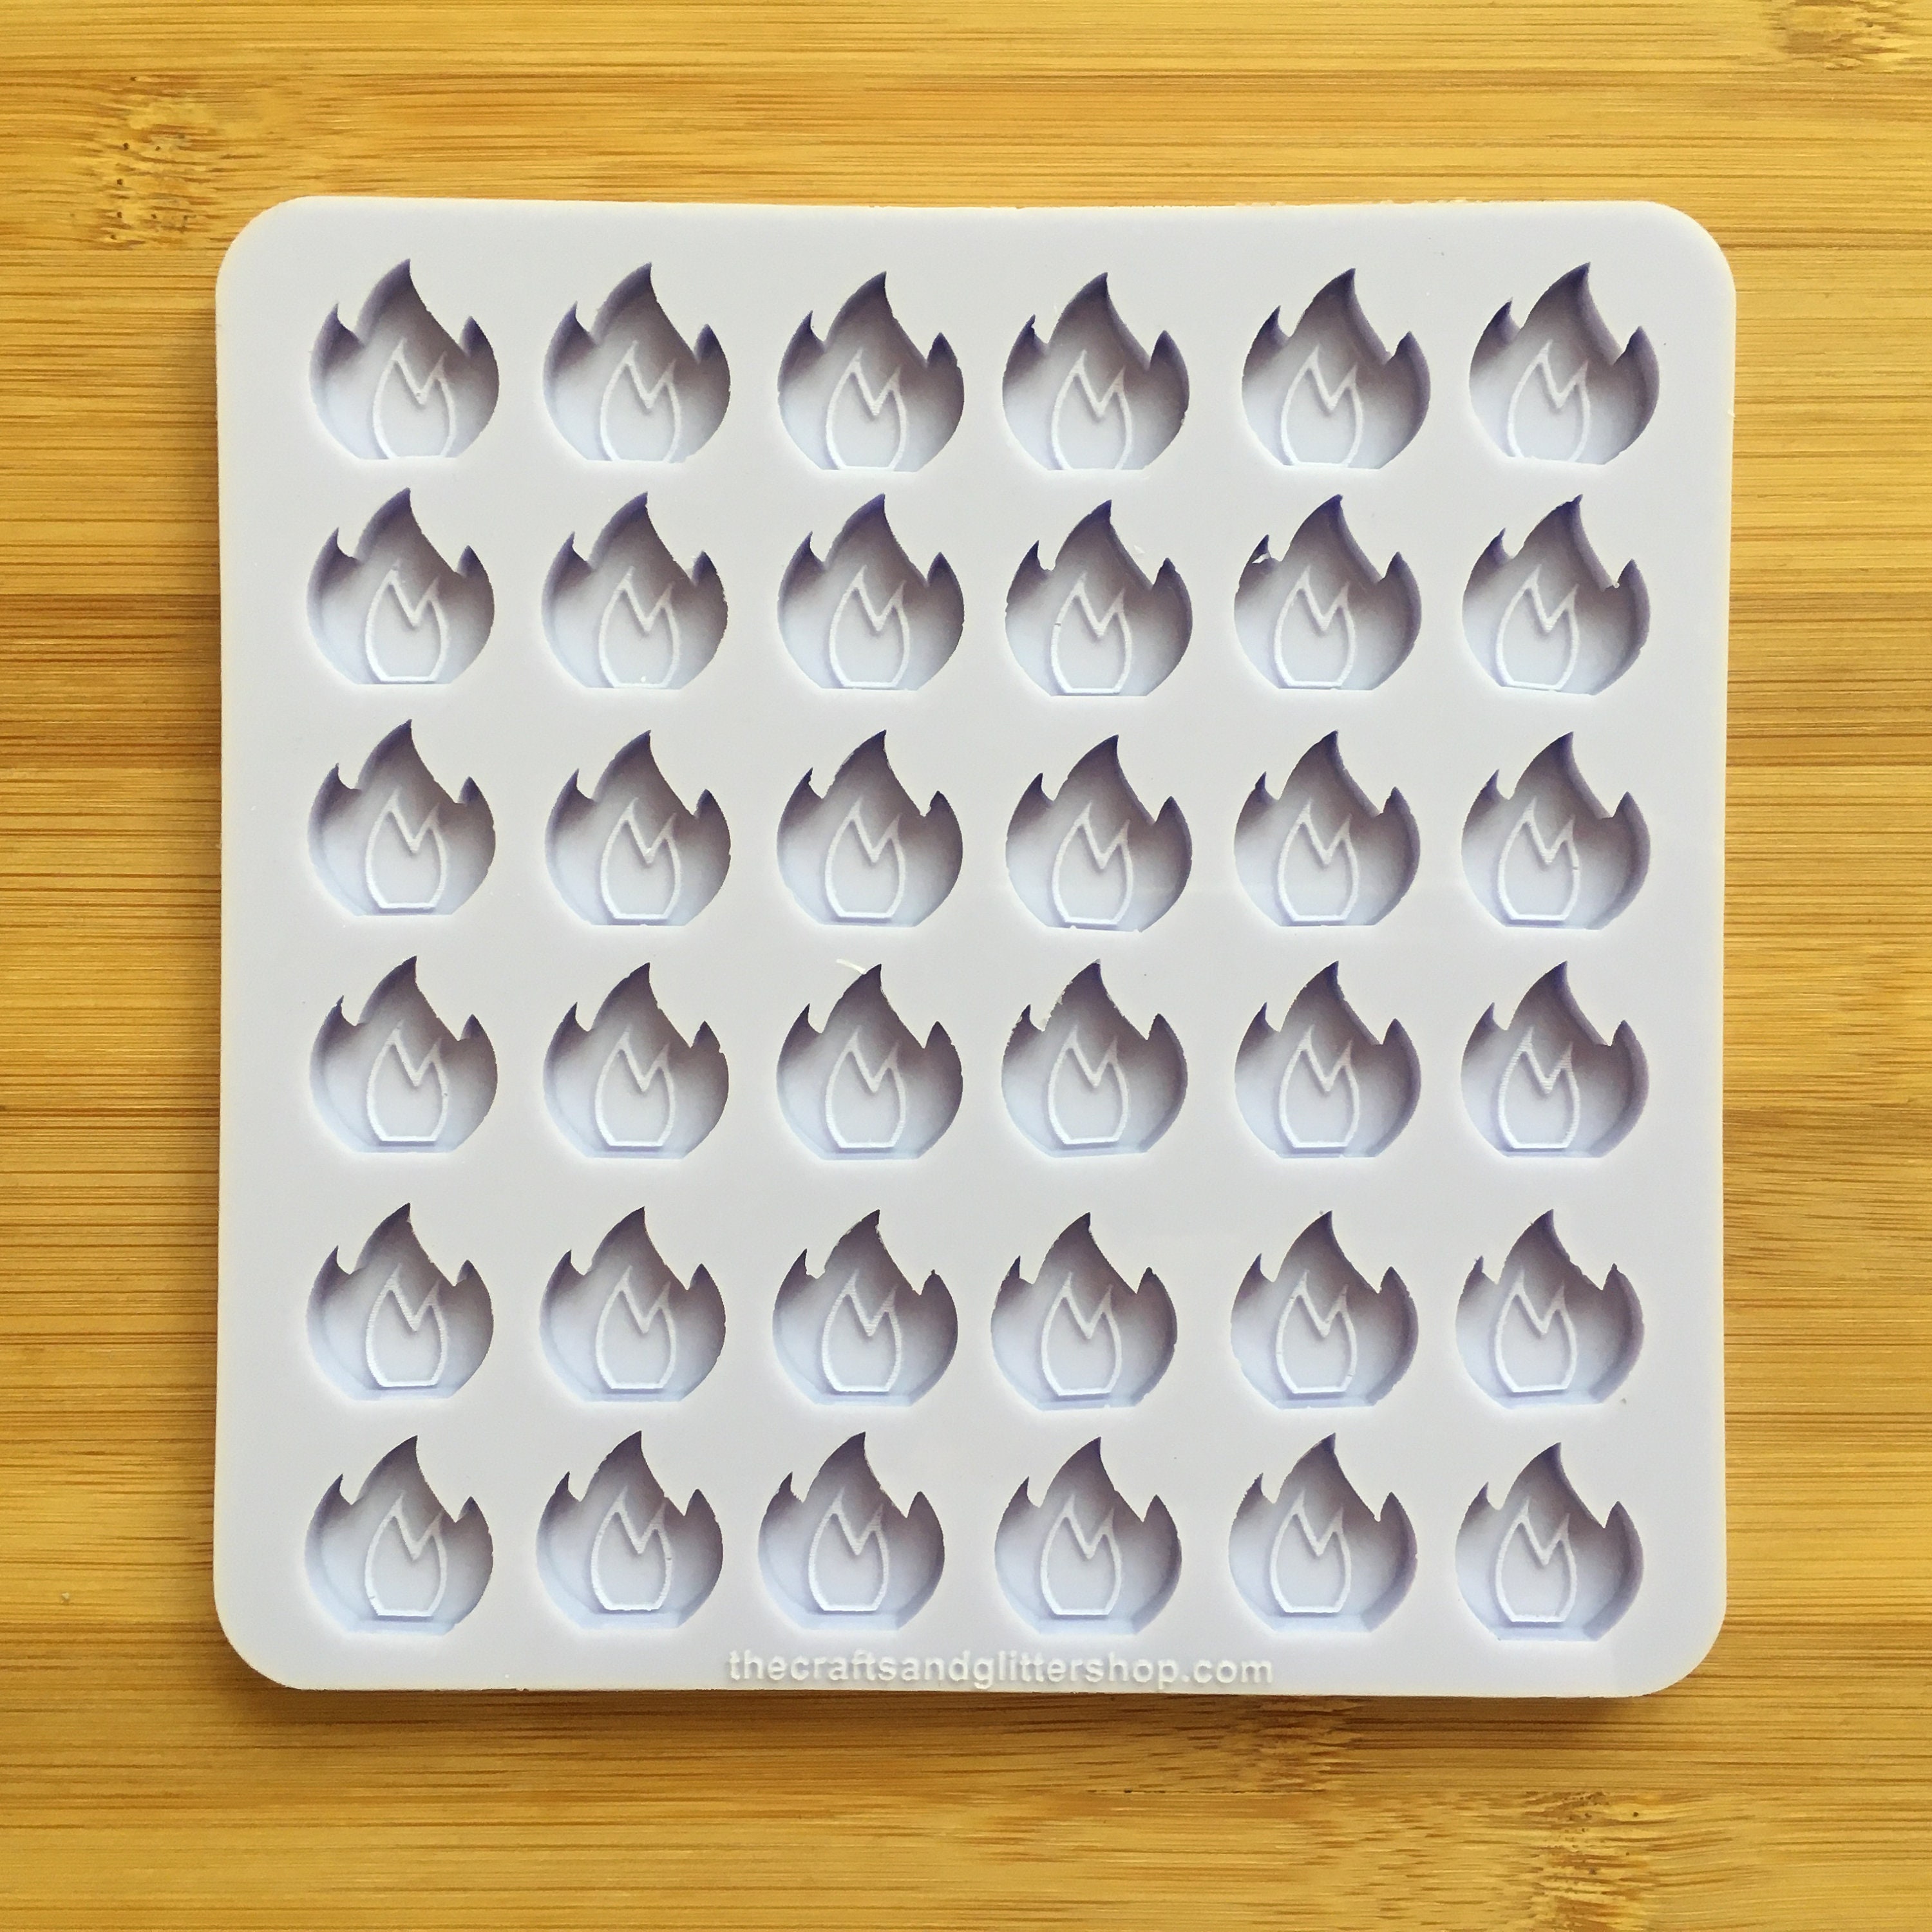 15 Cavity Silicone Candy Mold